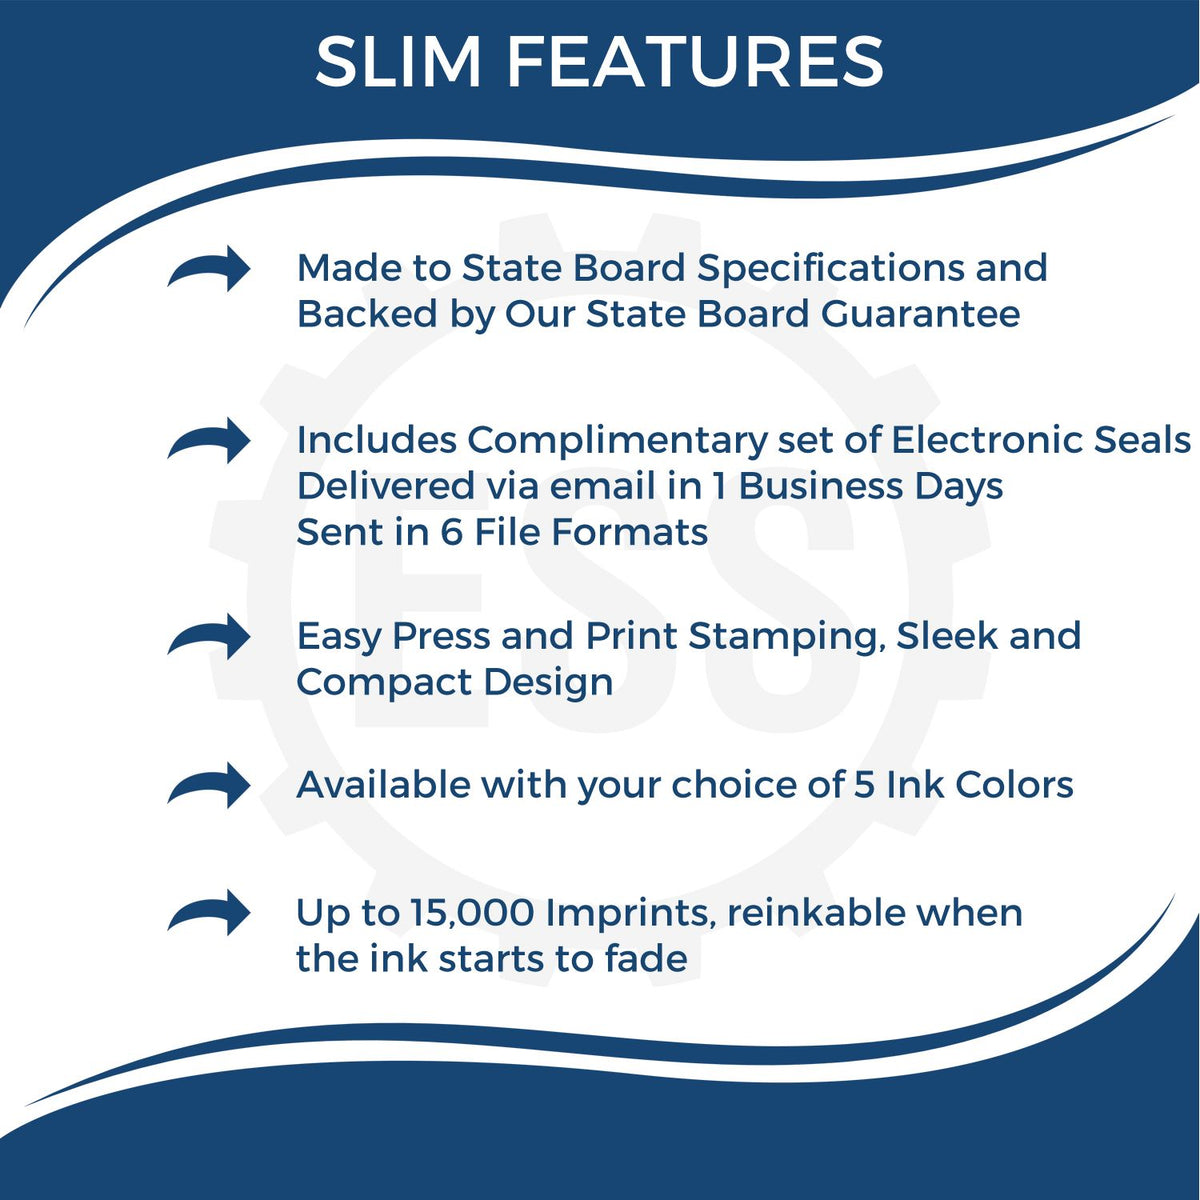 A picture of an infographic highlighting the selling points for the Slim Pre-Inked Nebraska Land Surveyor Seal Stamp